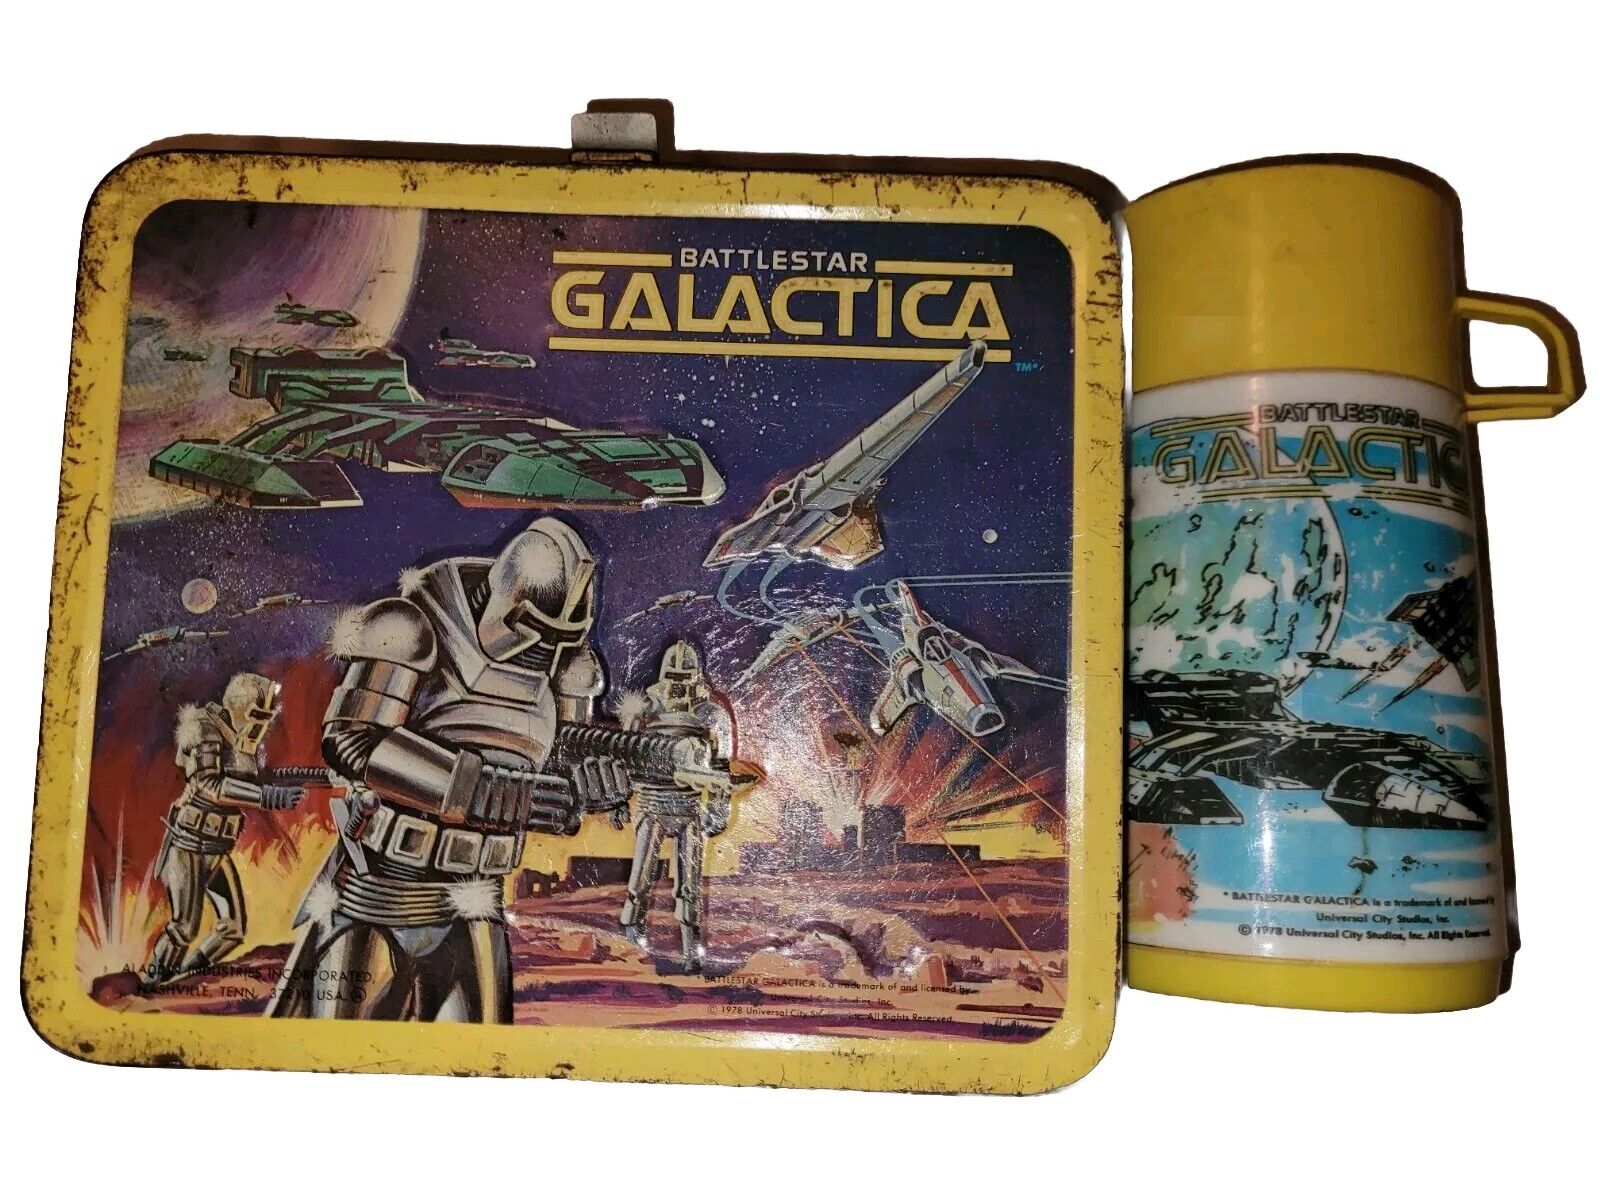 1978 Battlestar Galactica Vintage Metal Lunchbox WITH Thermos GREAT CONDITION